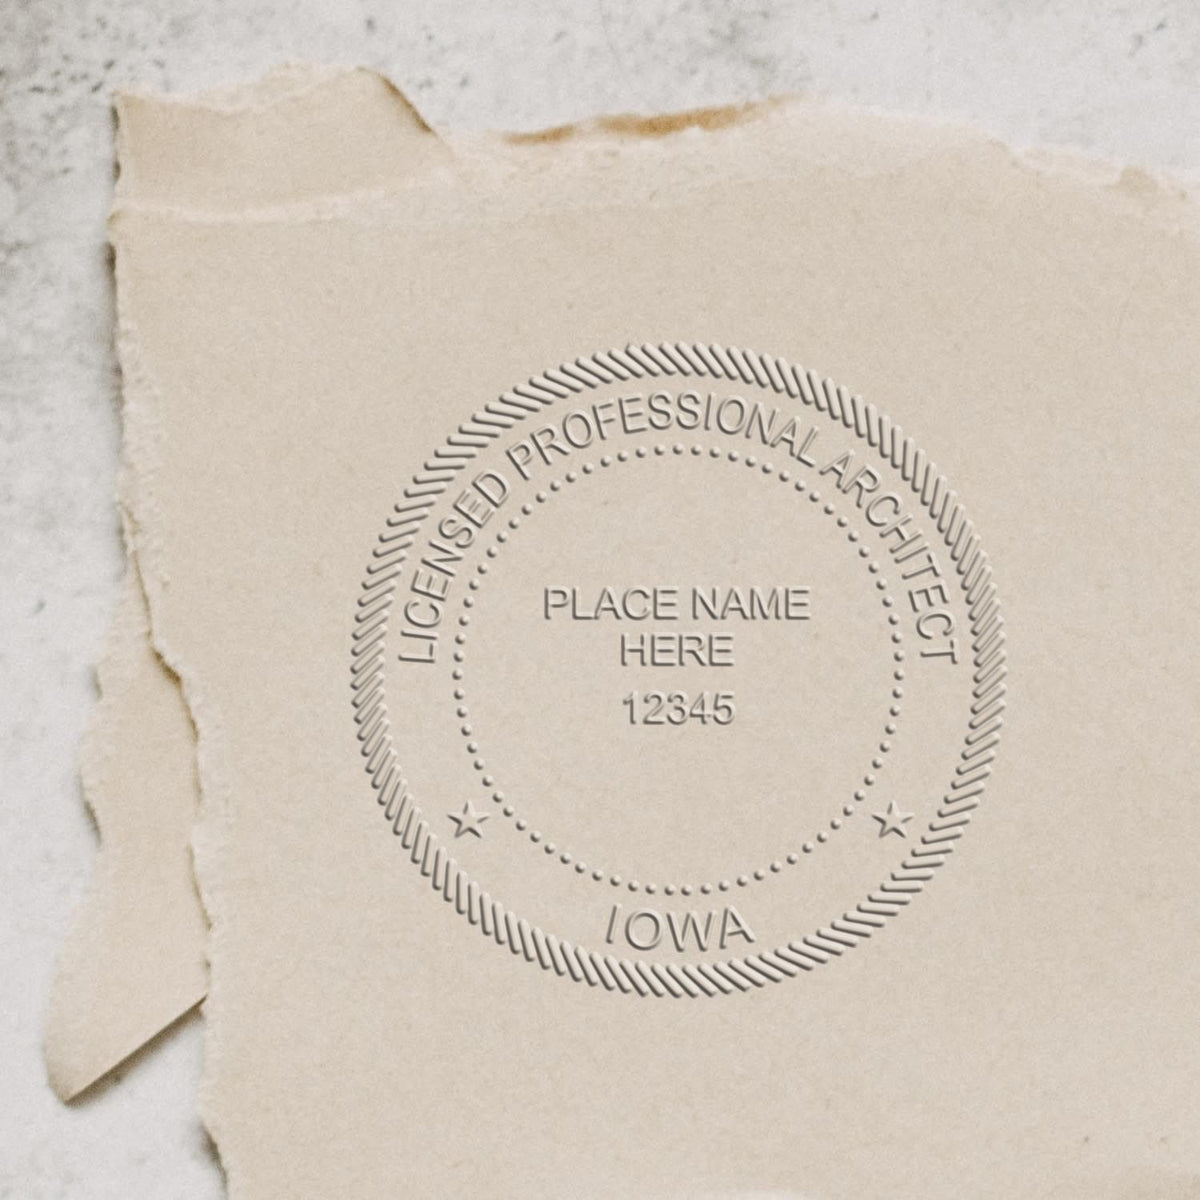 The Gift Iowa Architect Seal stamp impression comes to life with a crisp, detailed image stamped on paper - showcasing true professional quality.